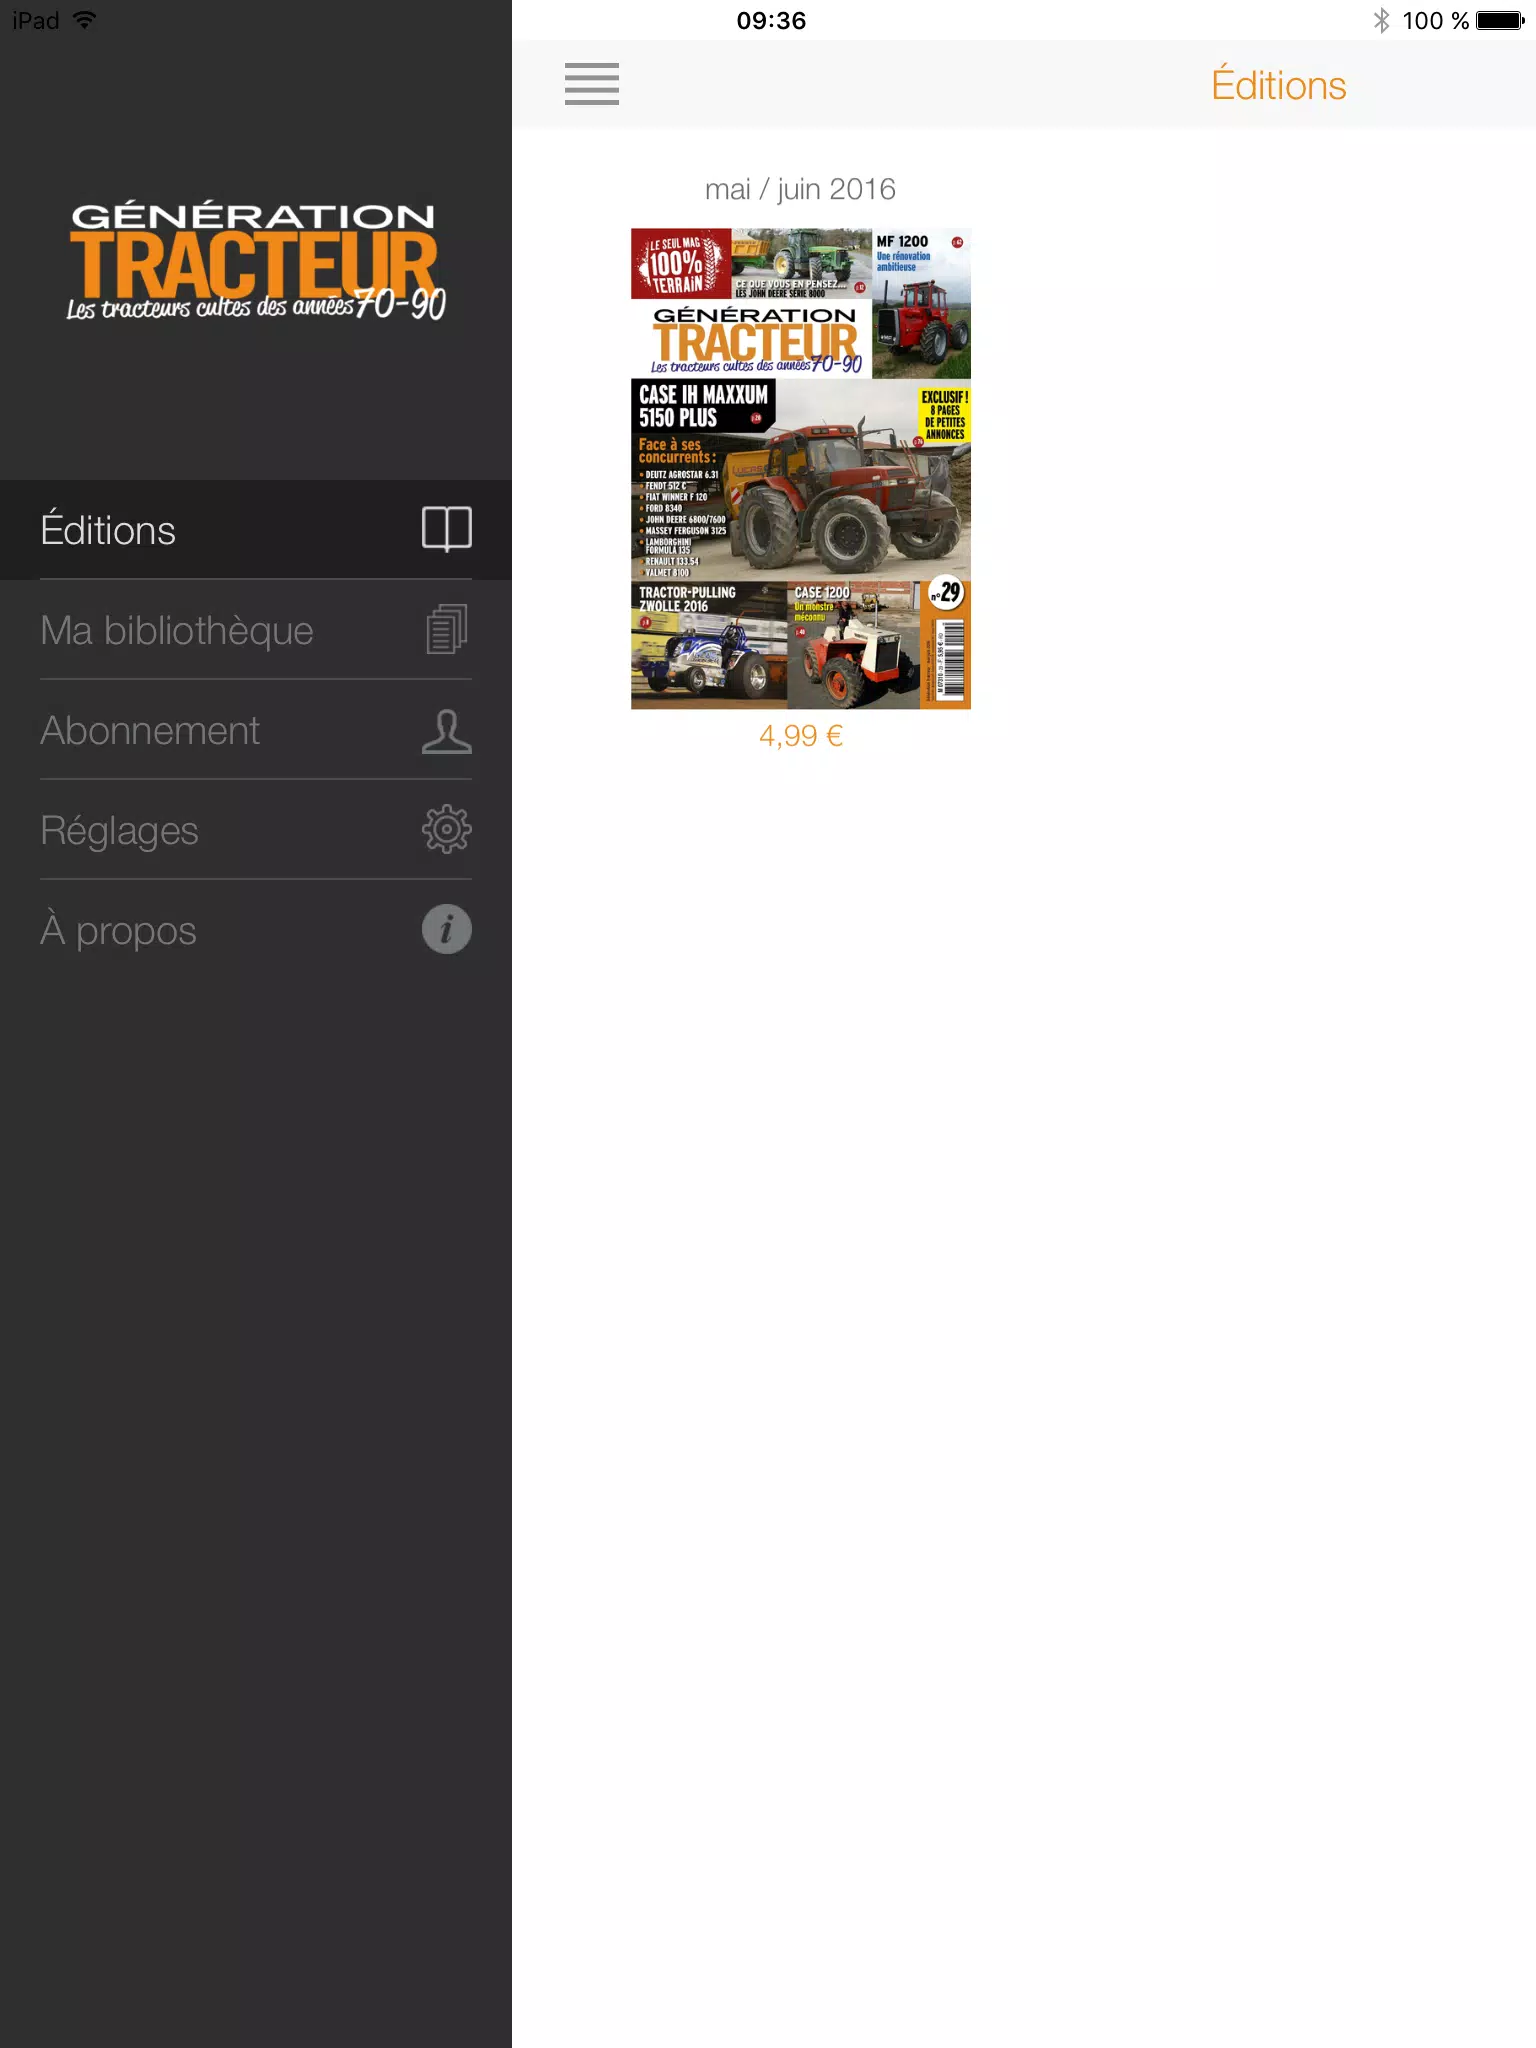 Free download Animeland Magazine APK for Android